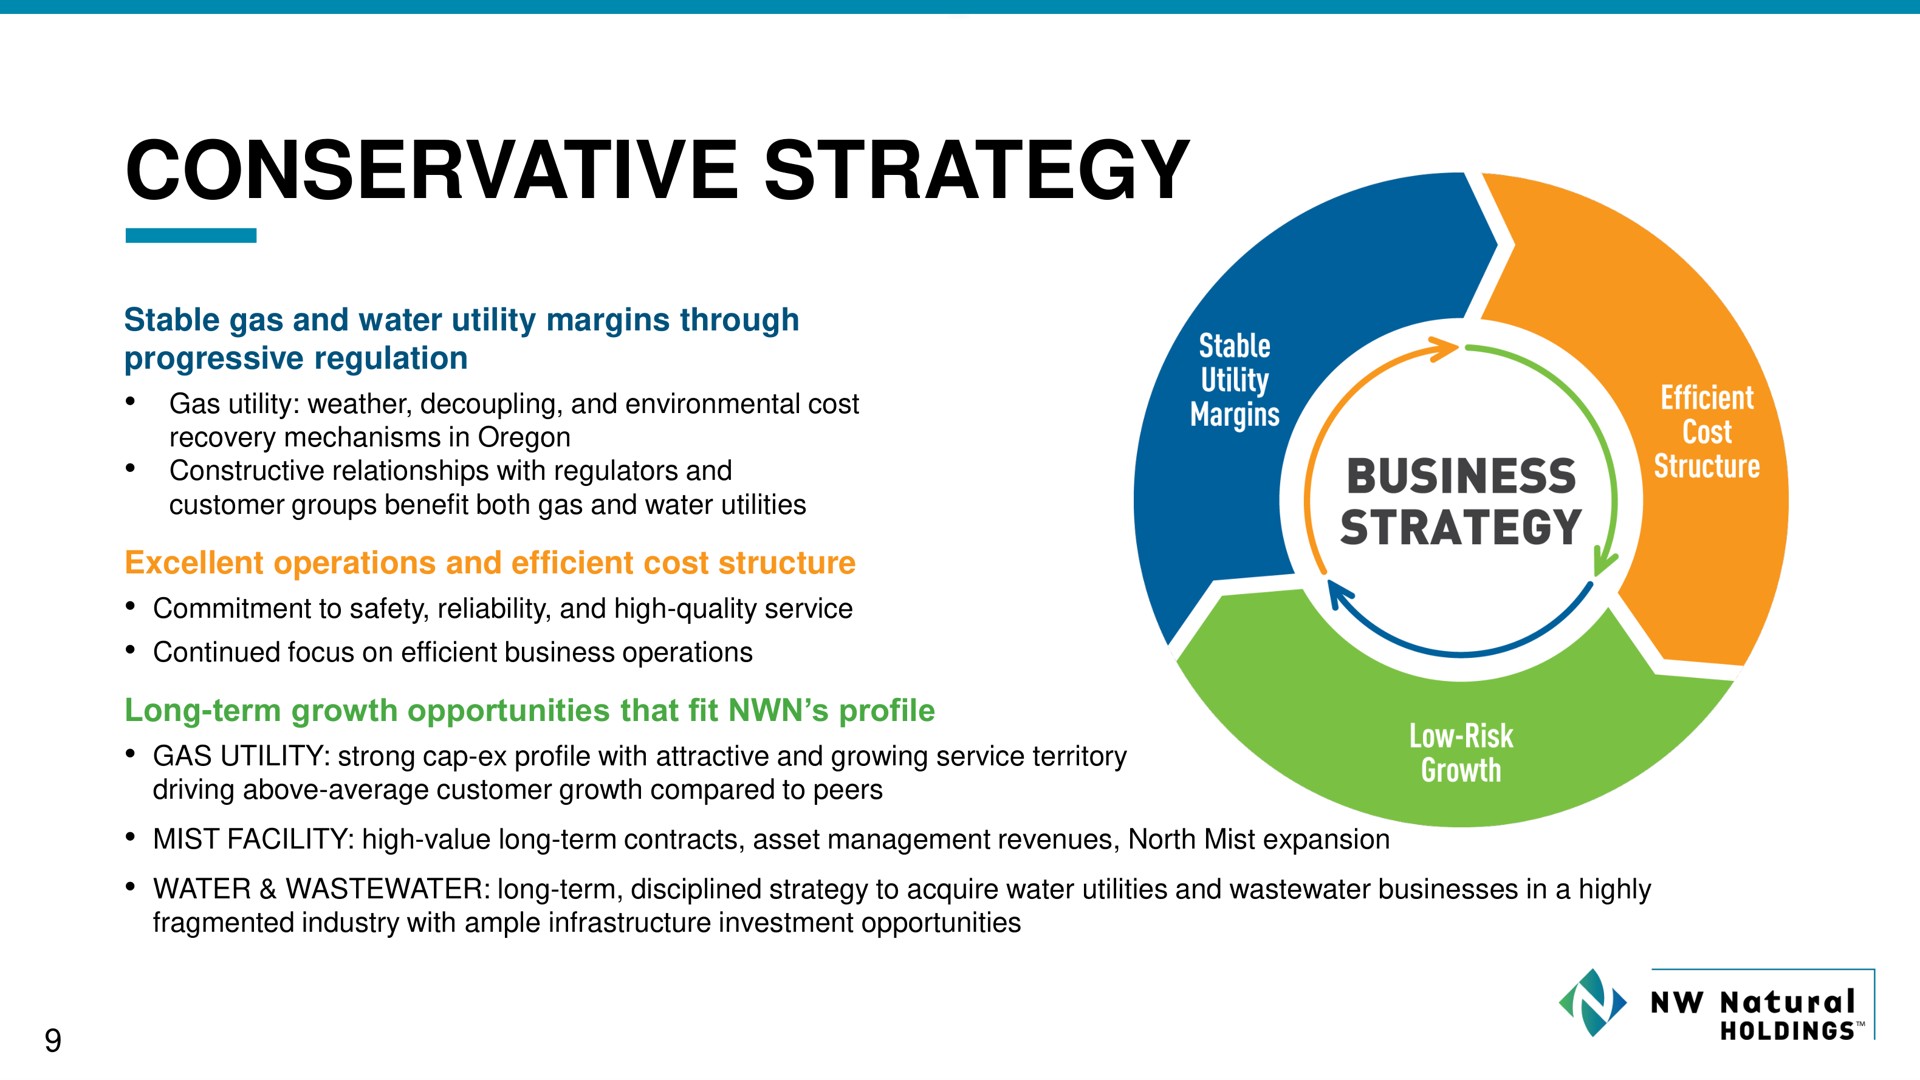 conservative strategy | NW Natural Holdings